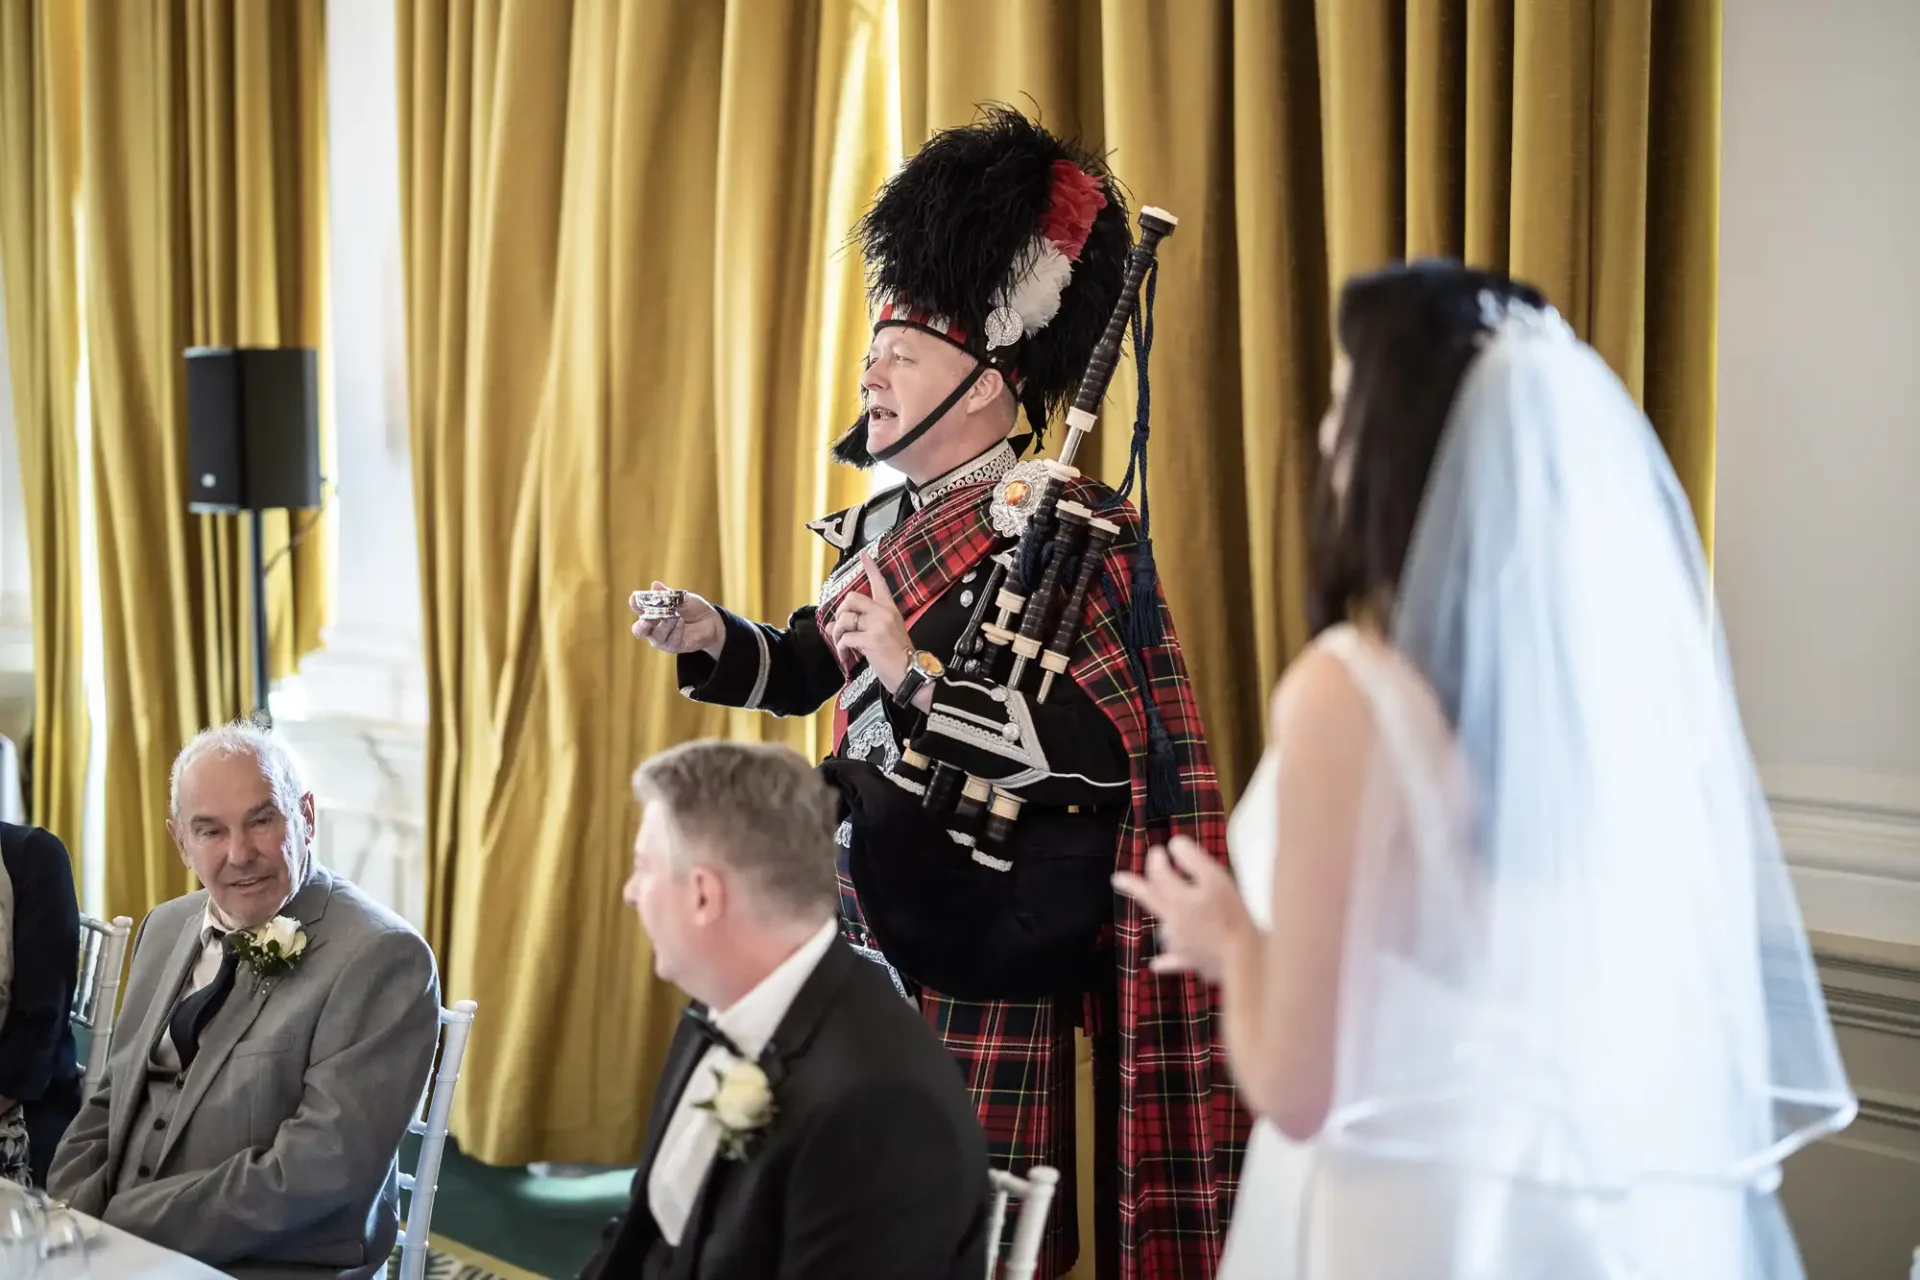 A bagpiper in traditional scottish attire, including a tartan kilt, addresses a bride and guests at a wedding reception indoors.